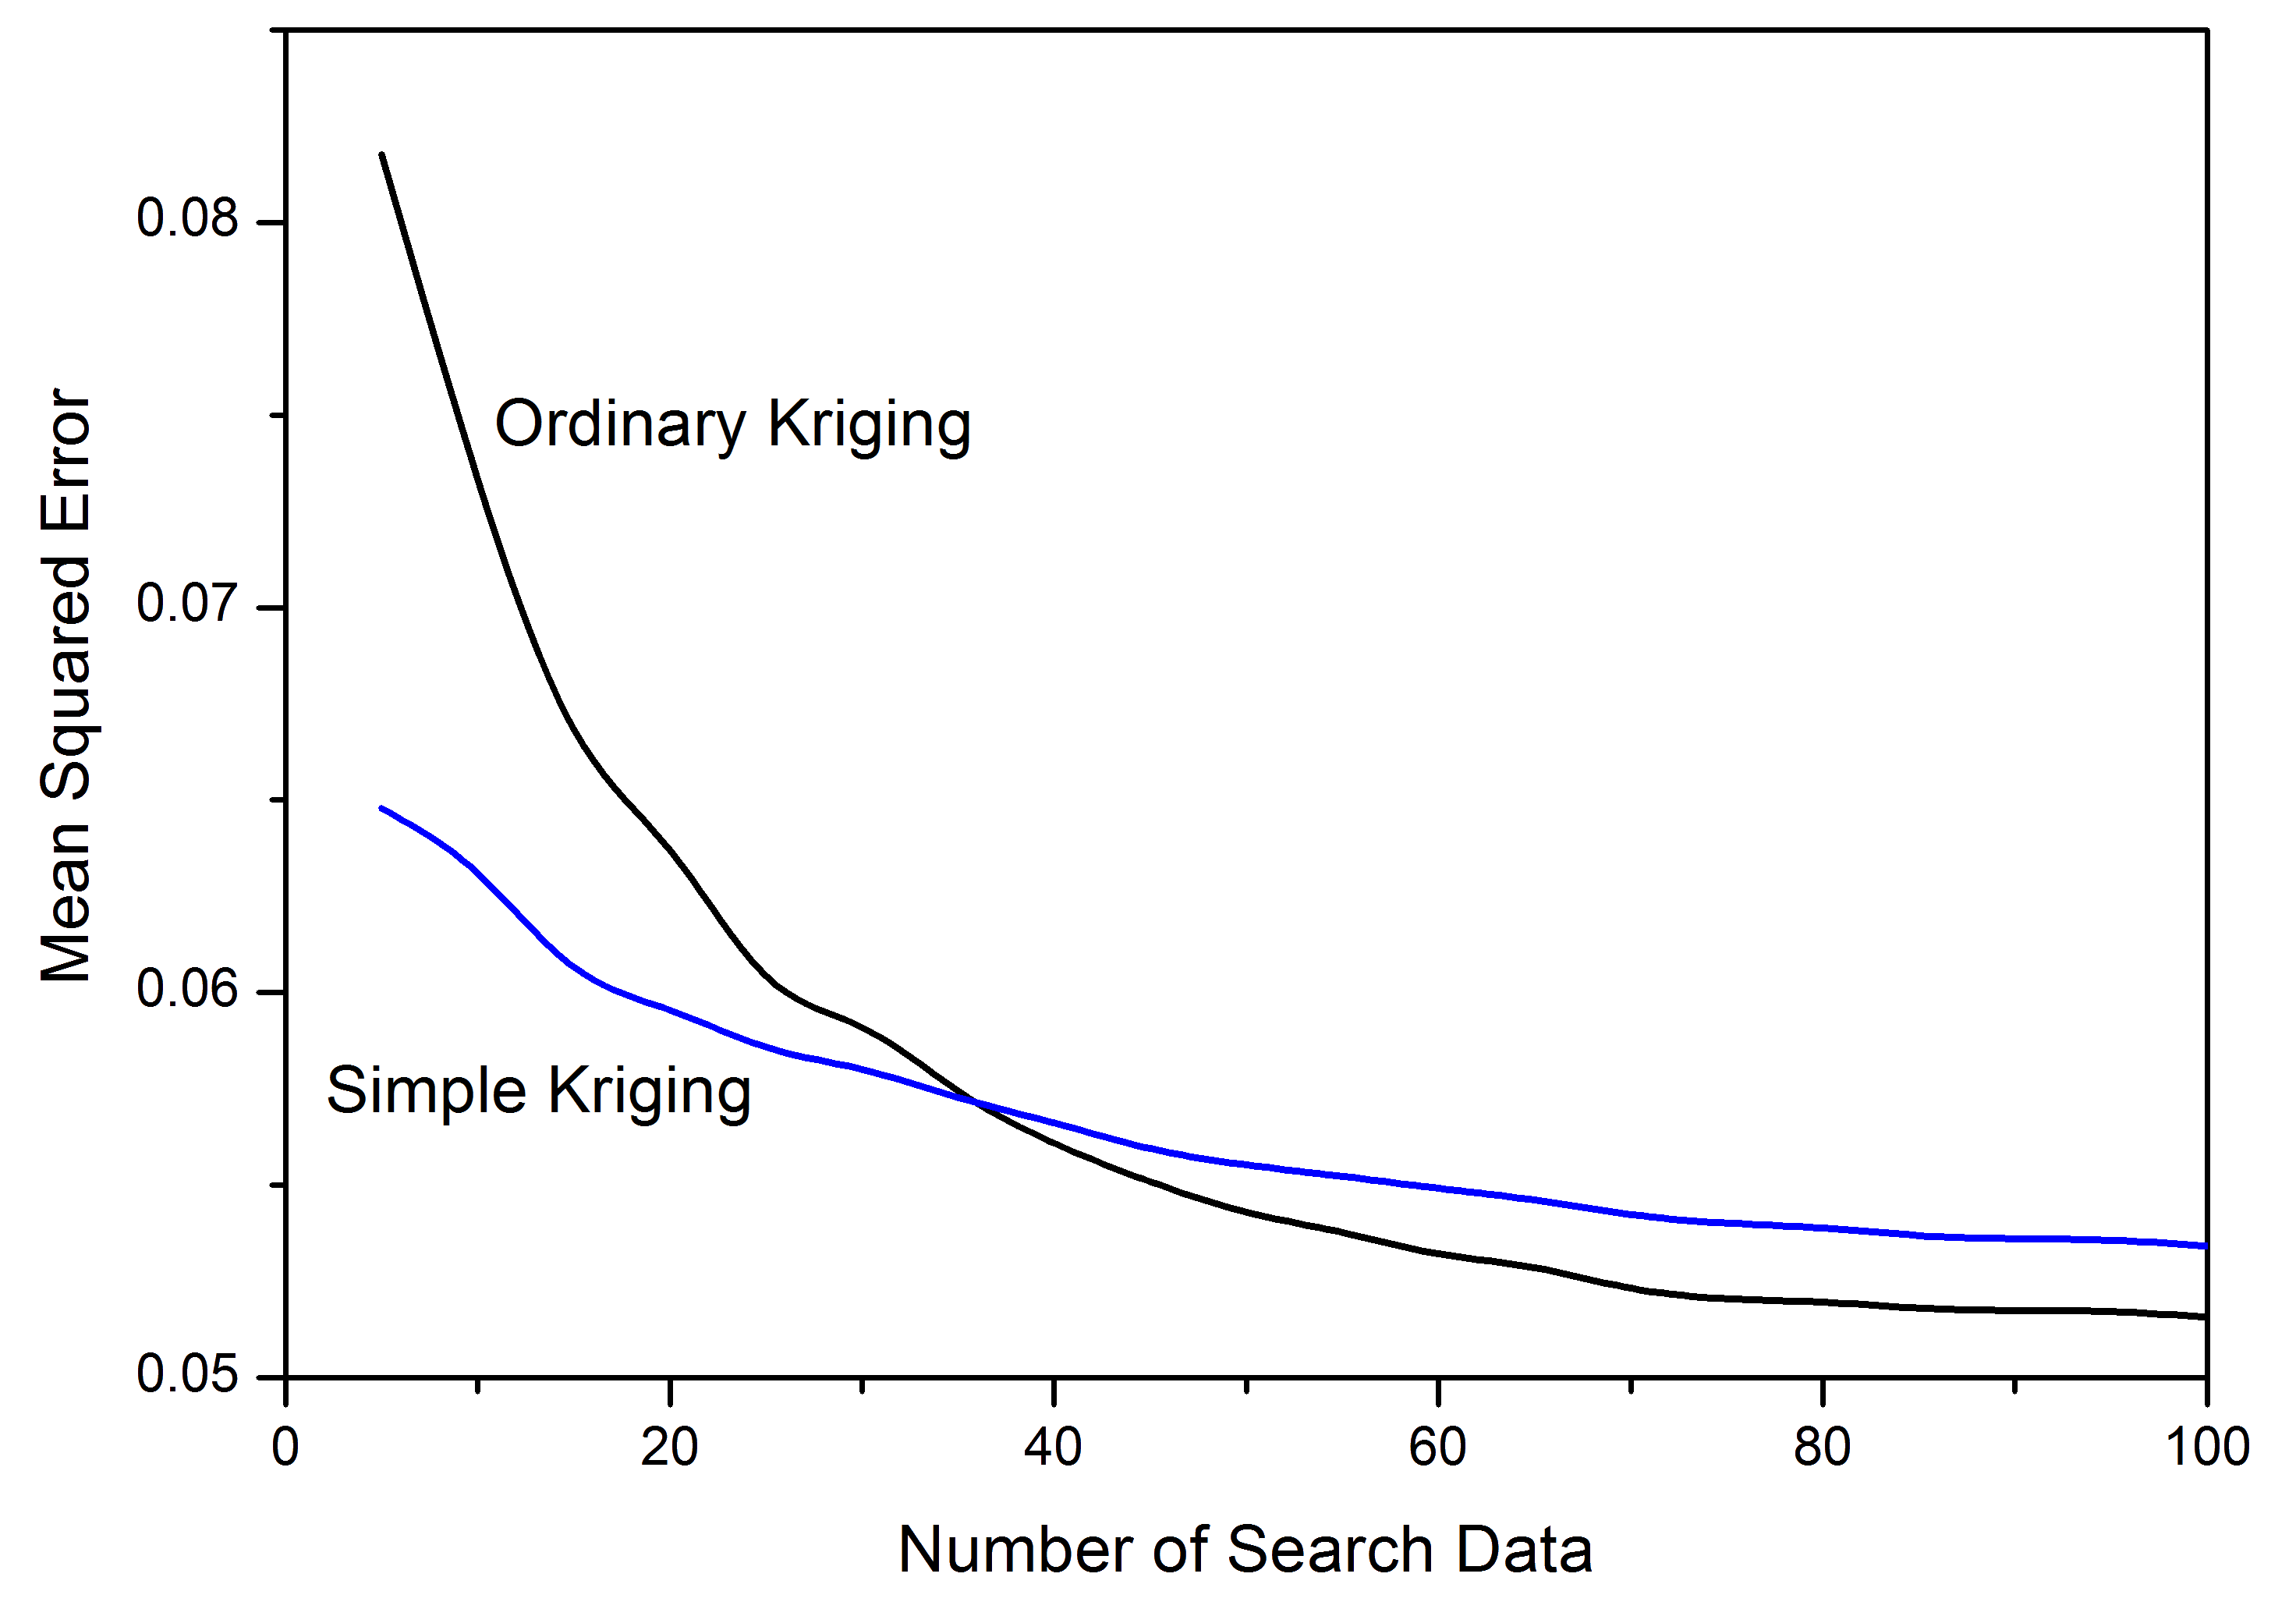 Mean squared error in cross validation as a function of the number of search data included for a copper porphyry deposit, using data from (Deutsch, Szymanski, & Deutsch, 2014).